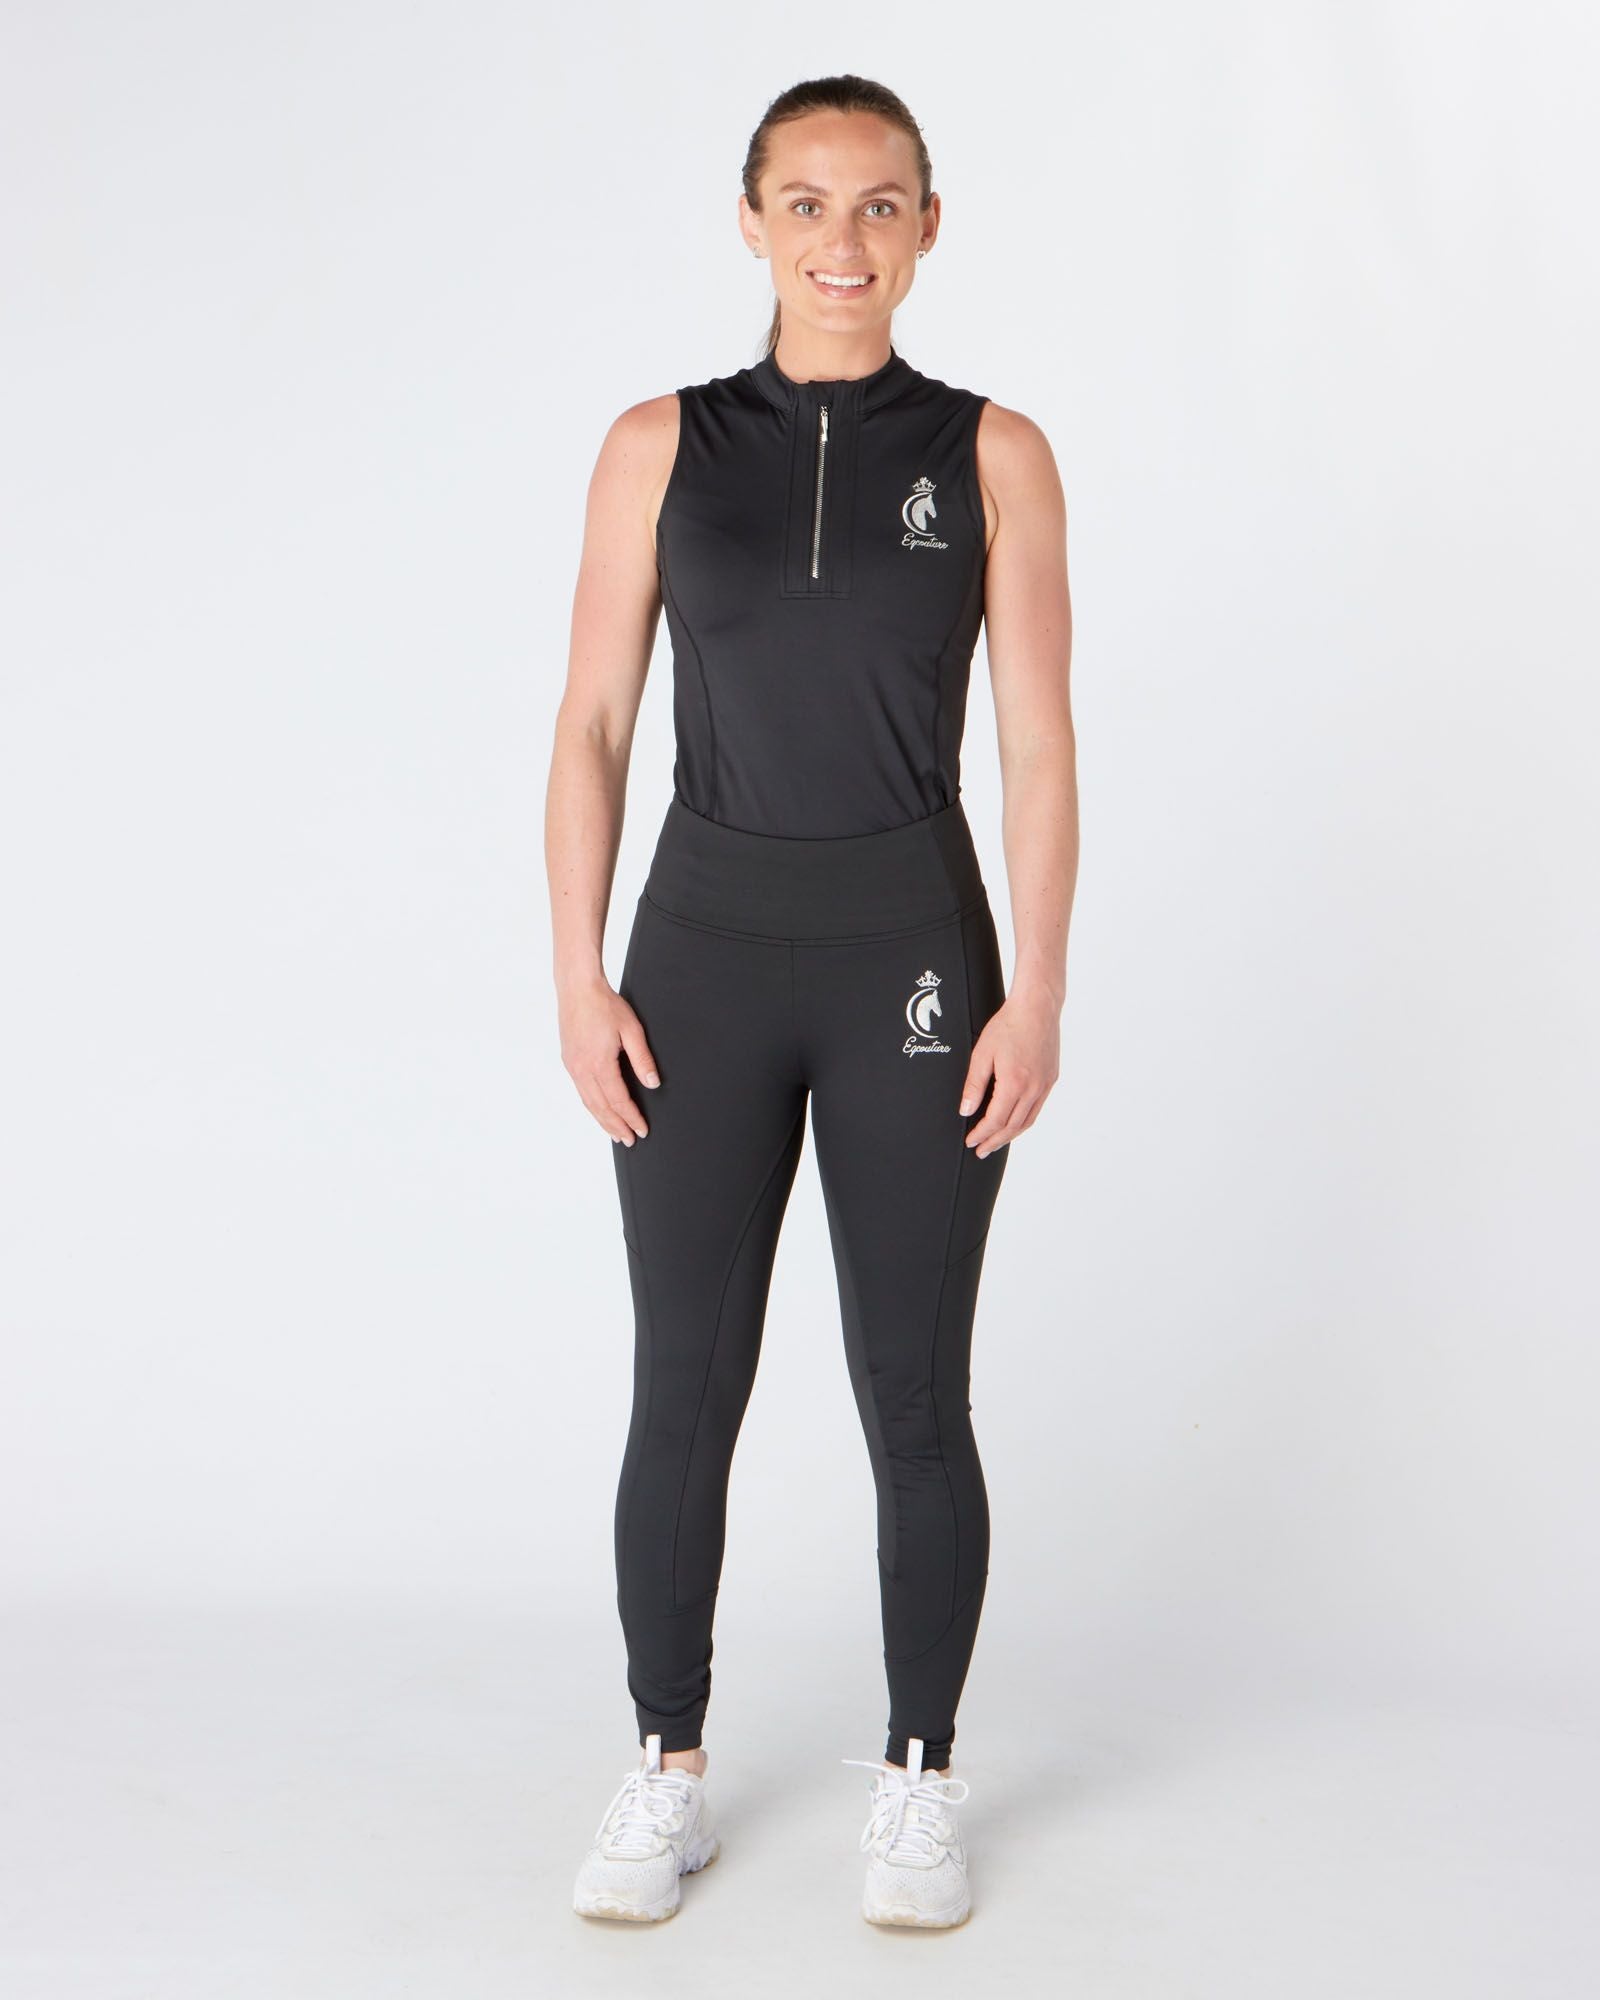 gym sports riding leggings black with phone pockets